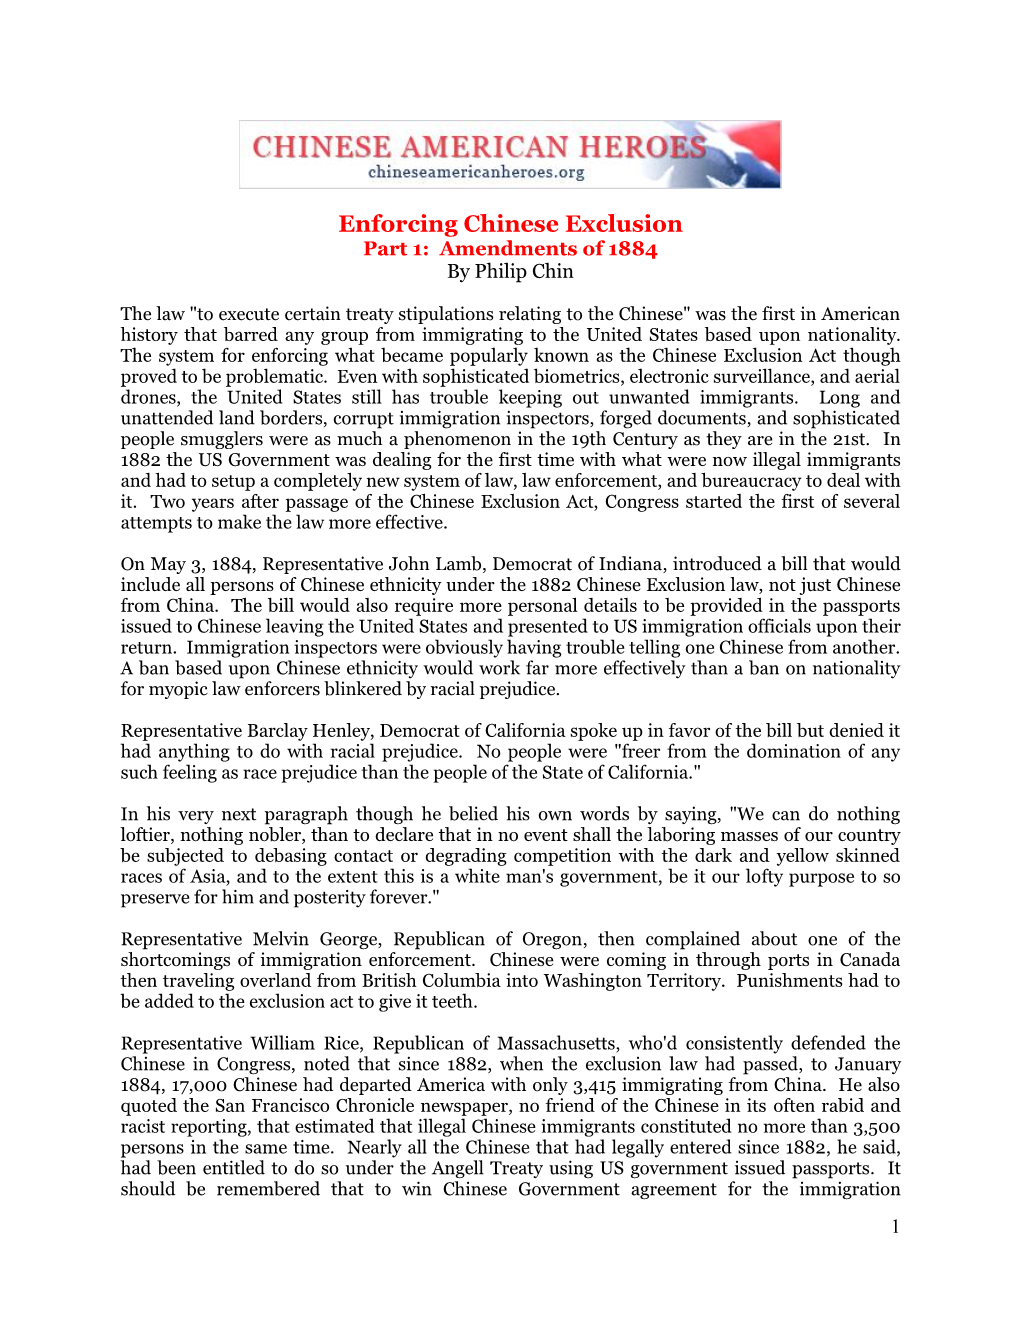 Enforcing Chinese Exclusion Part 1: Amendments of 1884 by Philip Chin